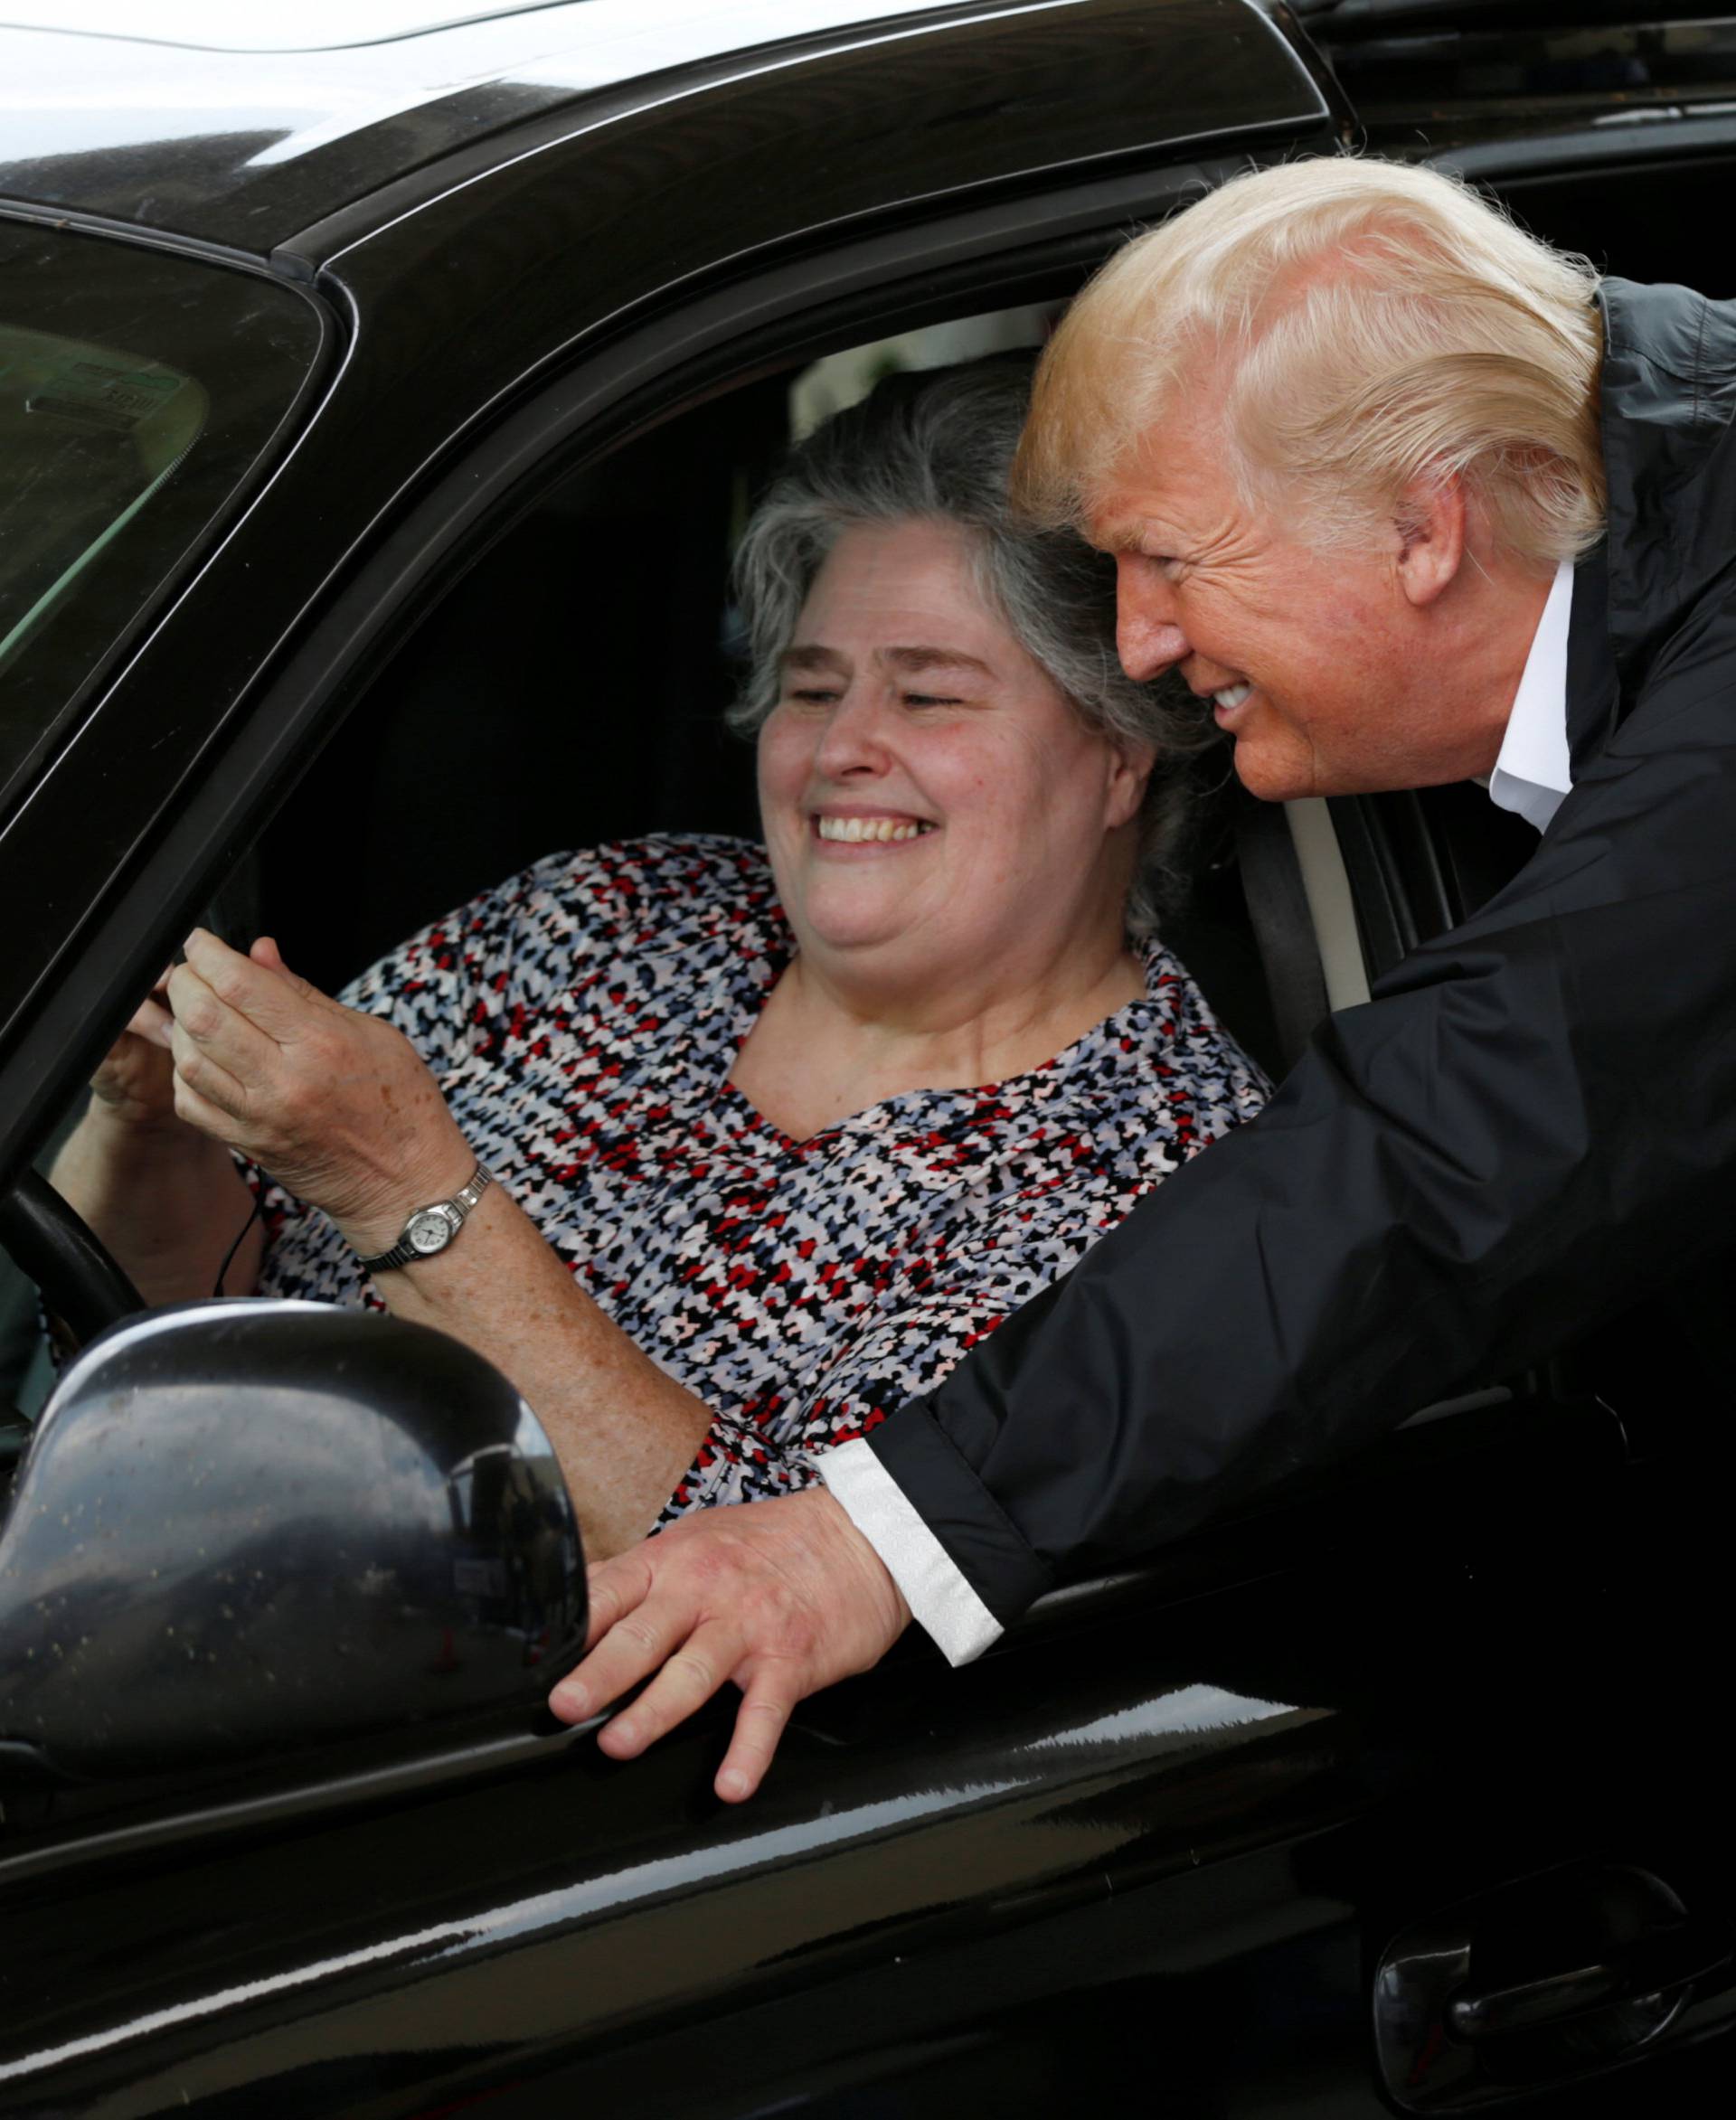 U.S. President Donald Trump poses for a selfie with an unidentified resident waiting in a relief supply drive-thru during a visit with flood survivors and volunteers in the aftermath of Hurricane Harvey in Houston